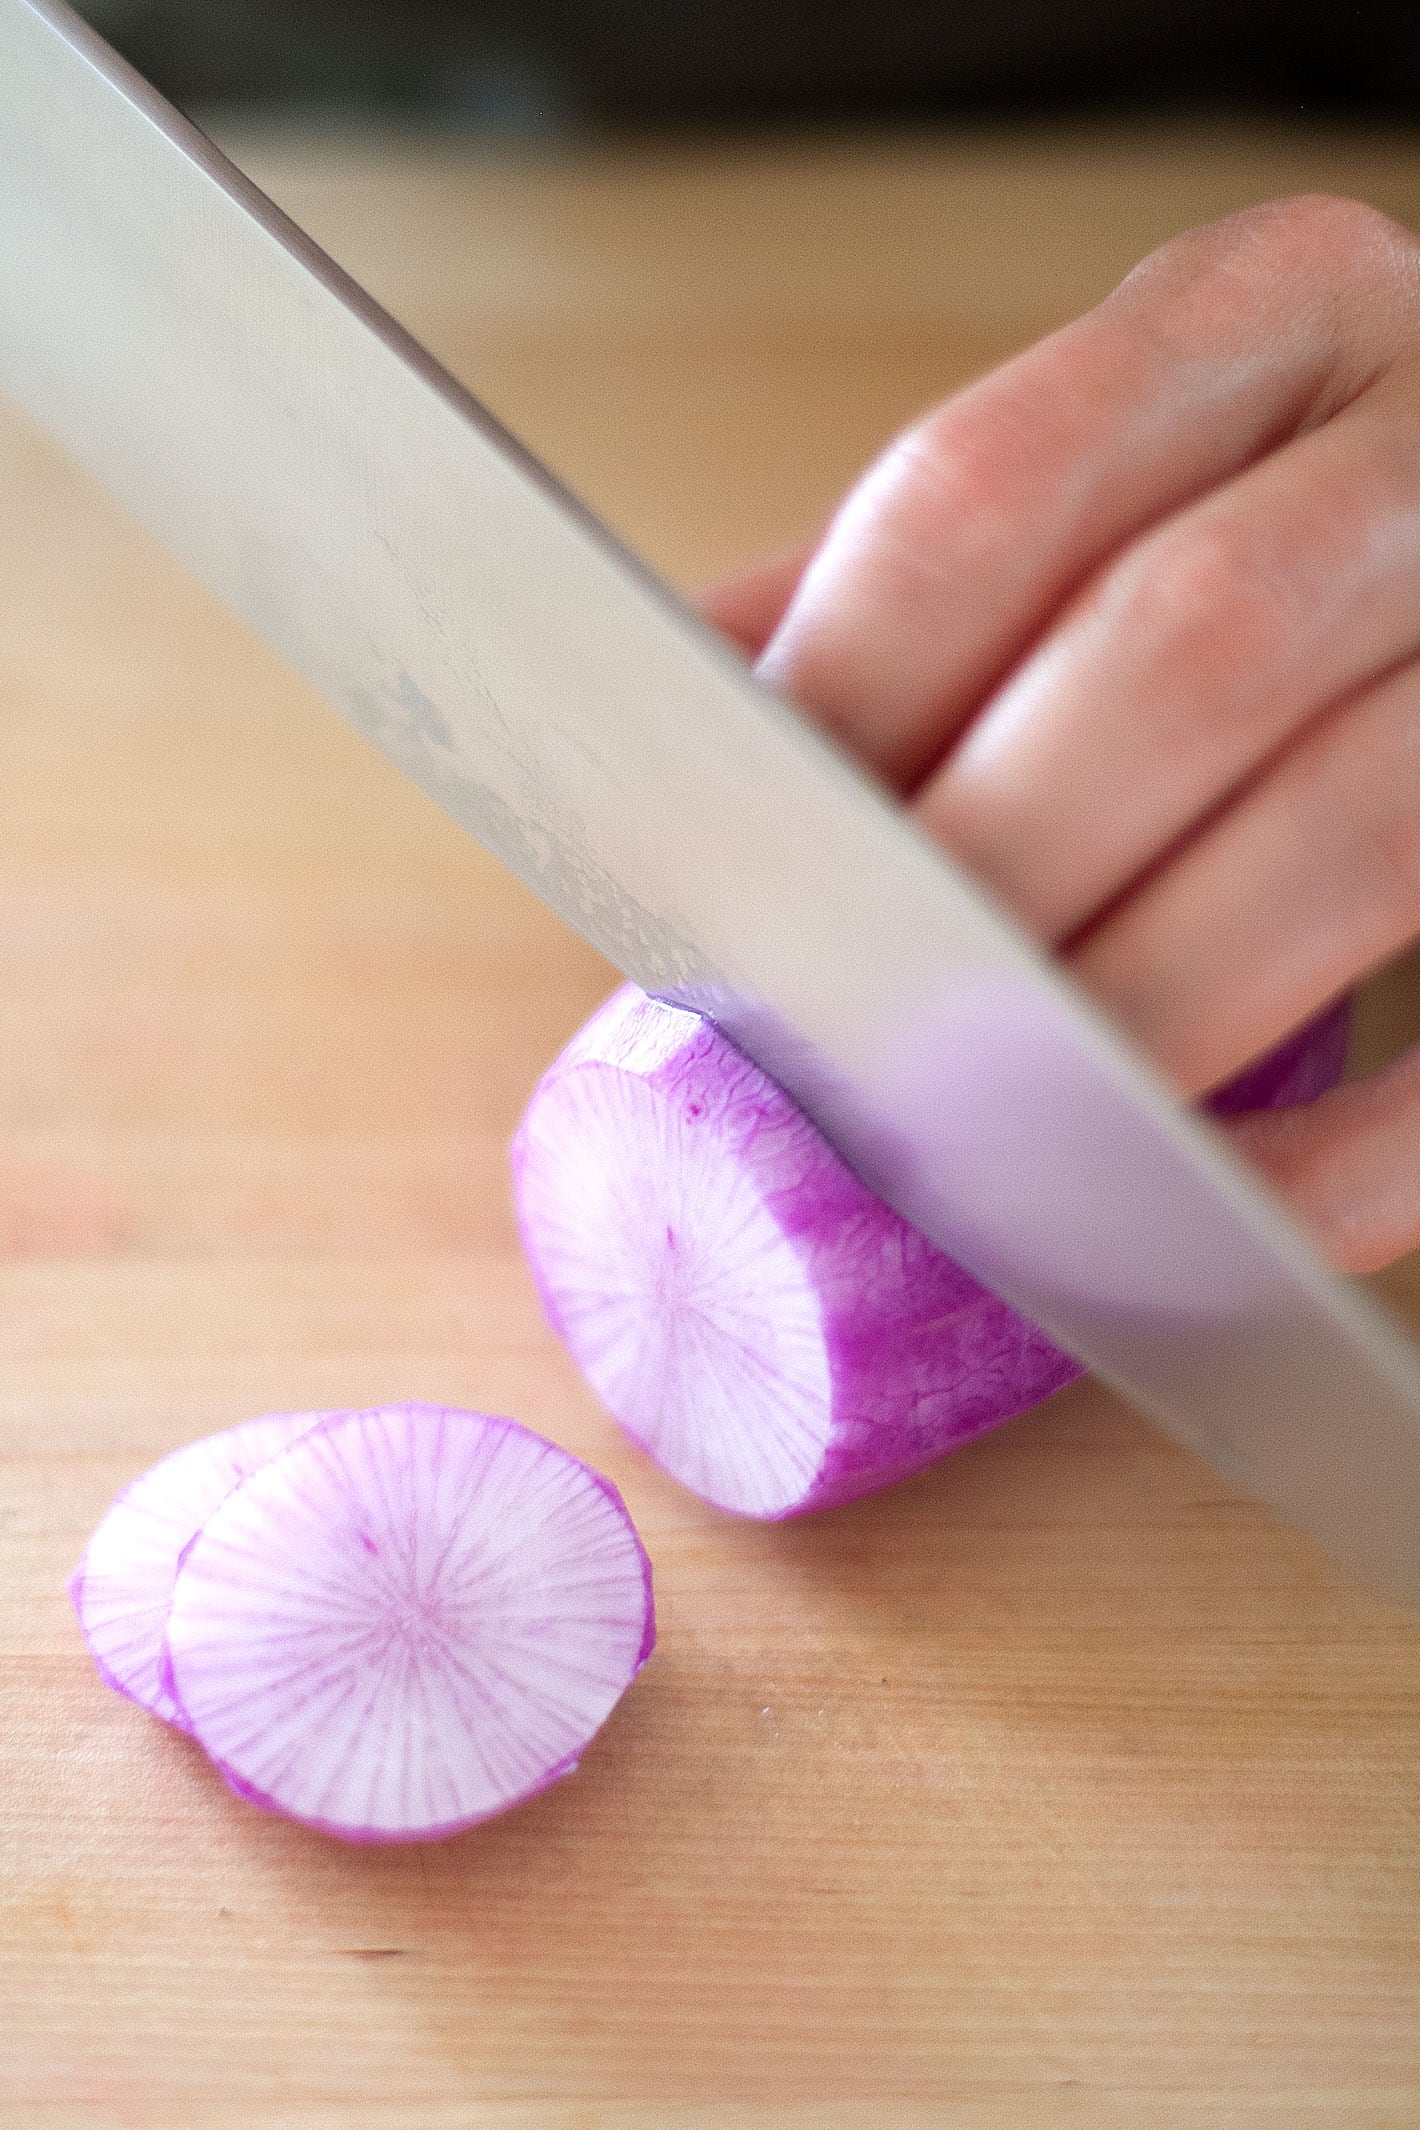 A hand hold peeled purple daikon radish on a cutting board with a chefs knife cutting slices.